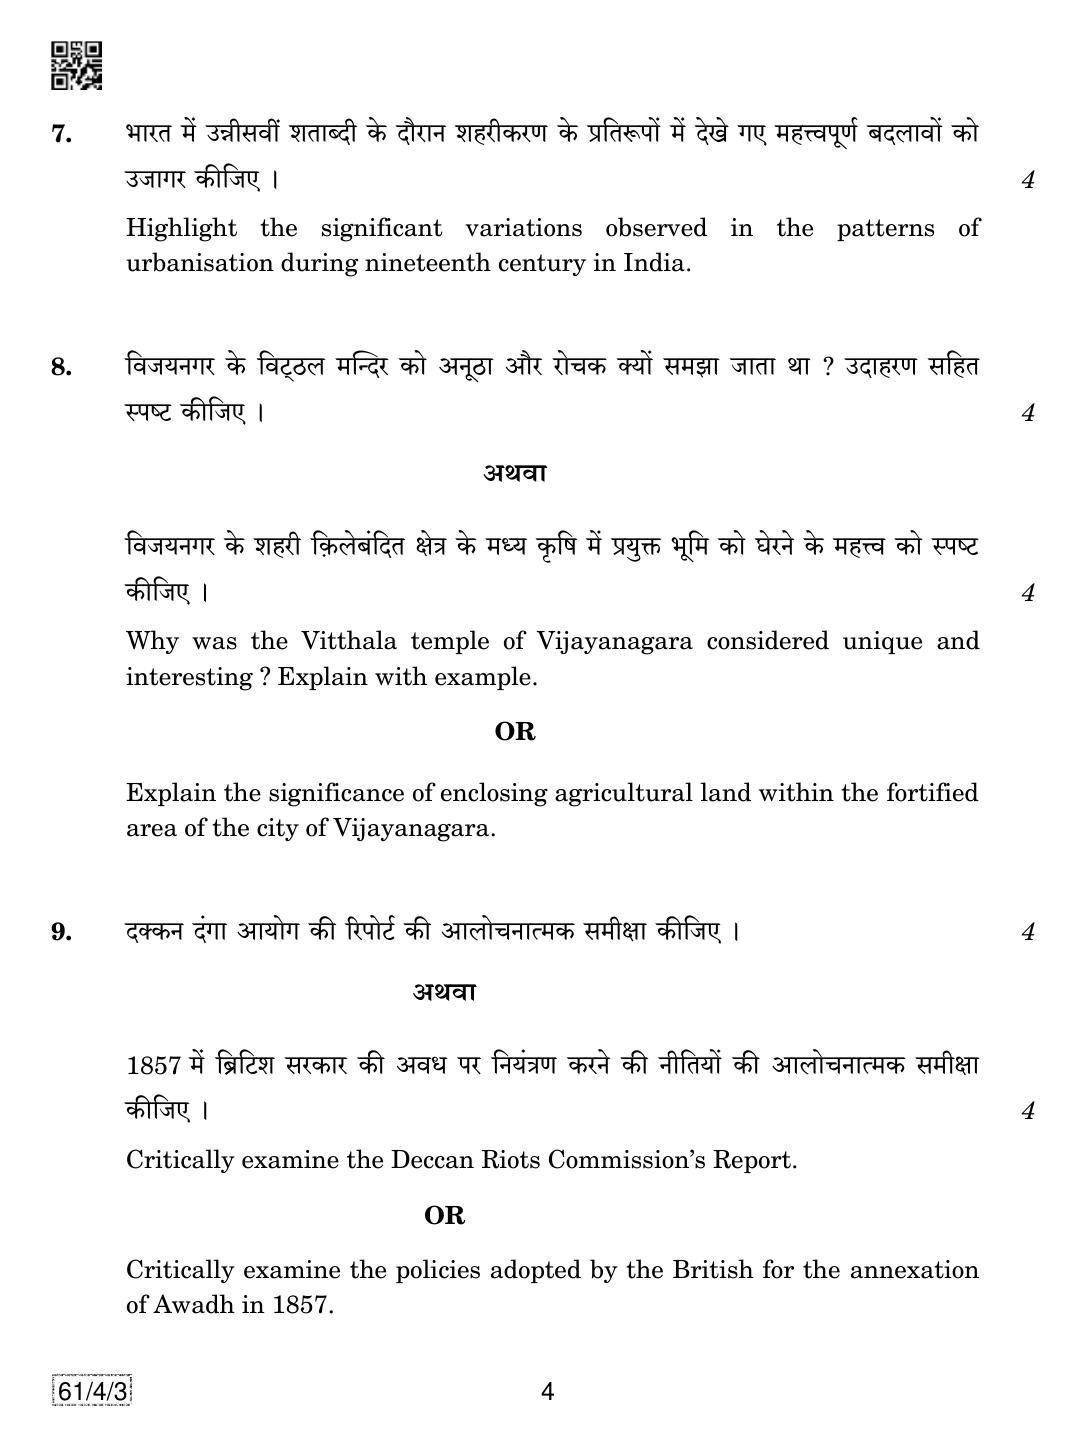 CBSE Class 12 61-4-3 History 2019 Question Paper - Page 4